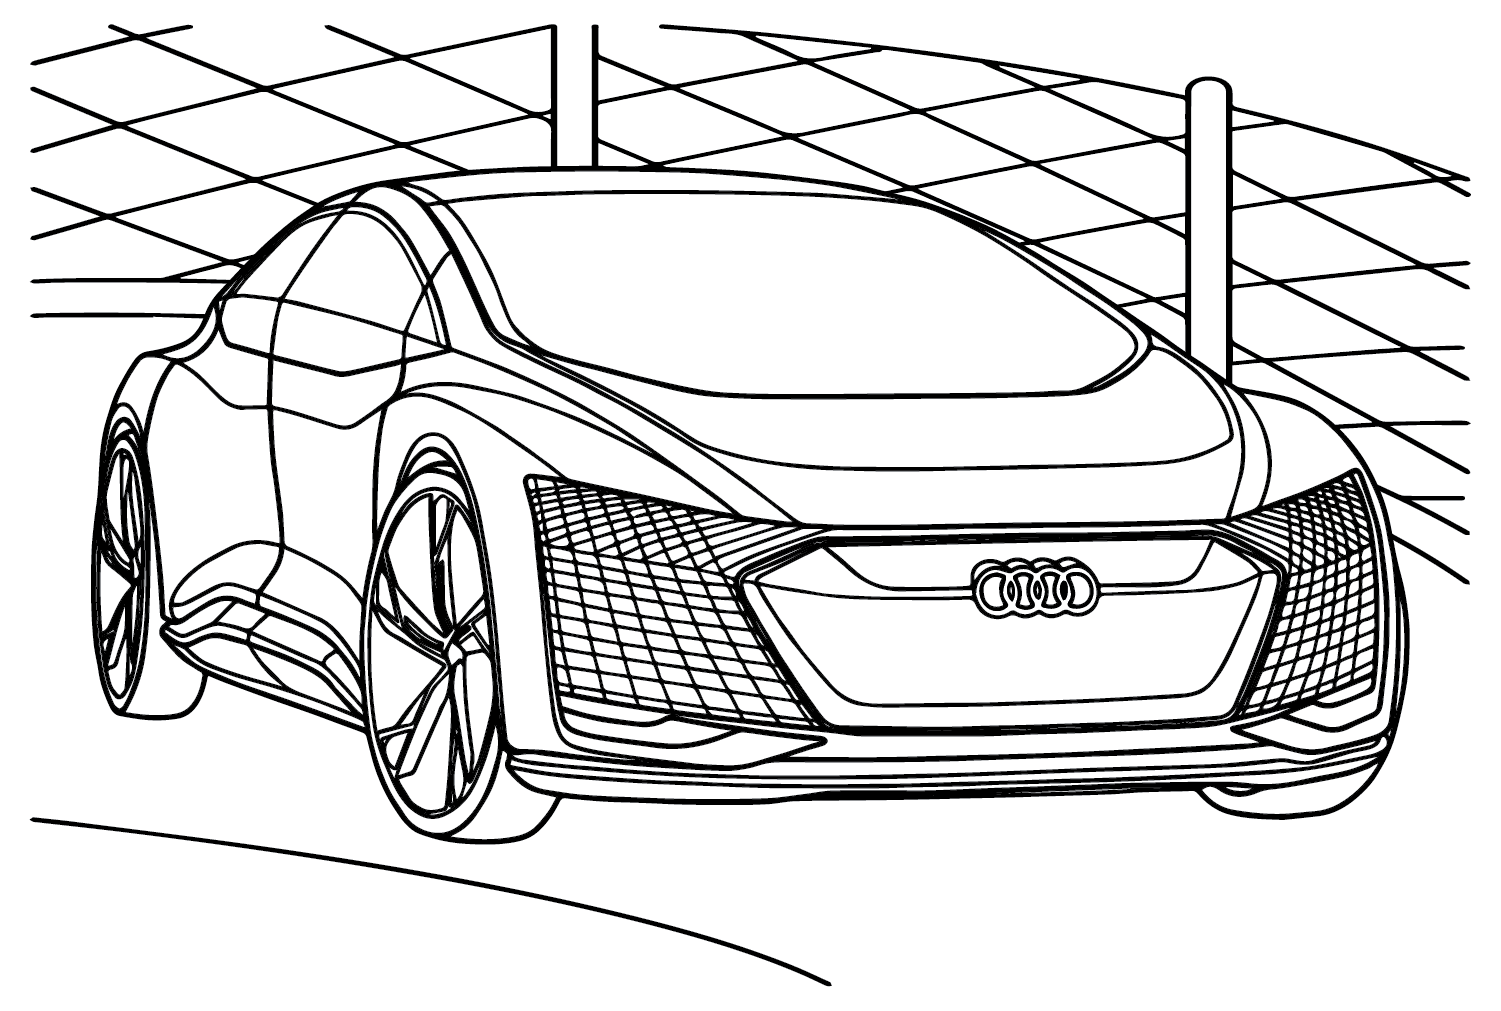 Audi Aicon Coloring Page from Audi